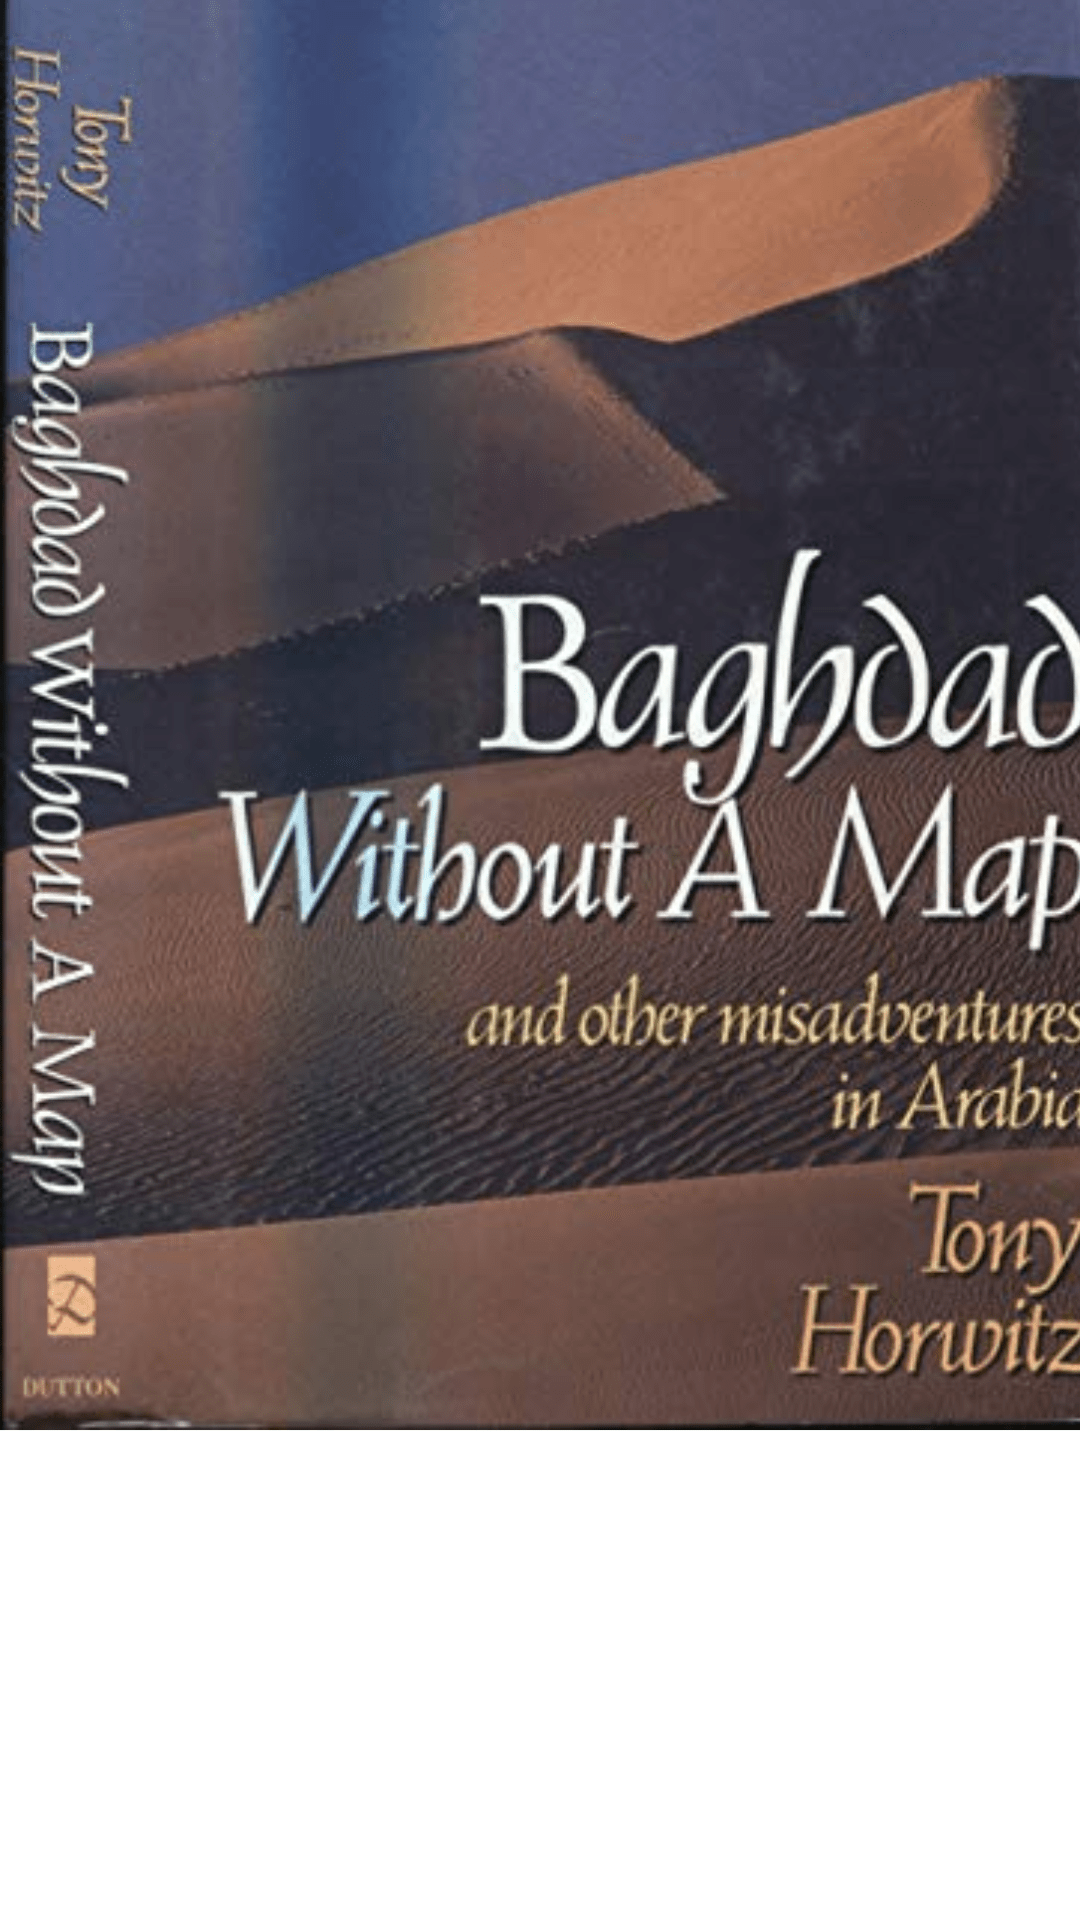 Horwitz Tony : Baghdad without A Map